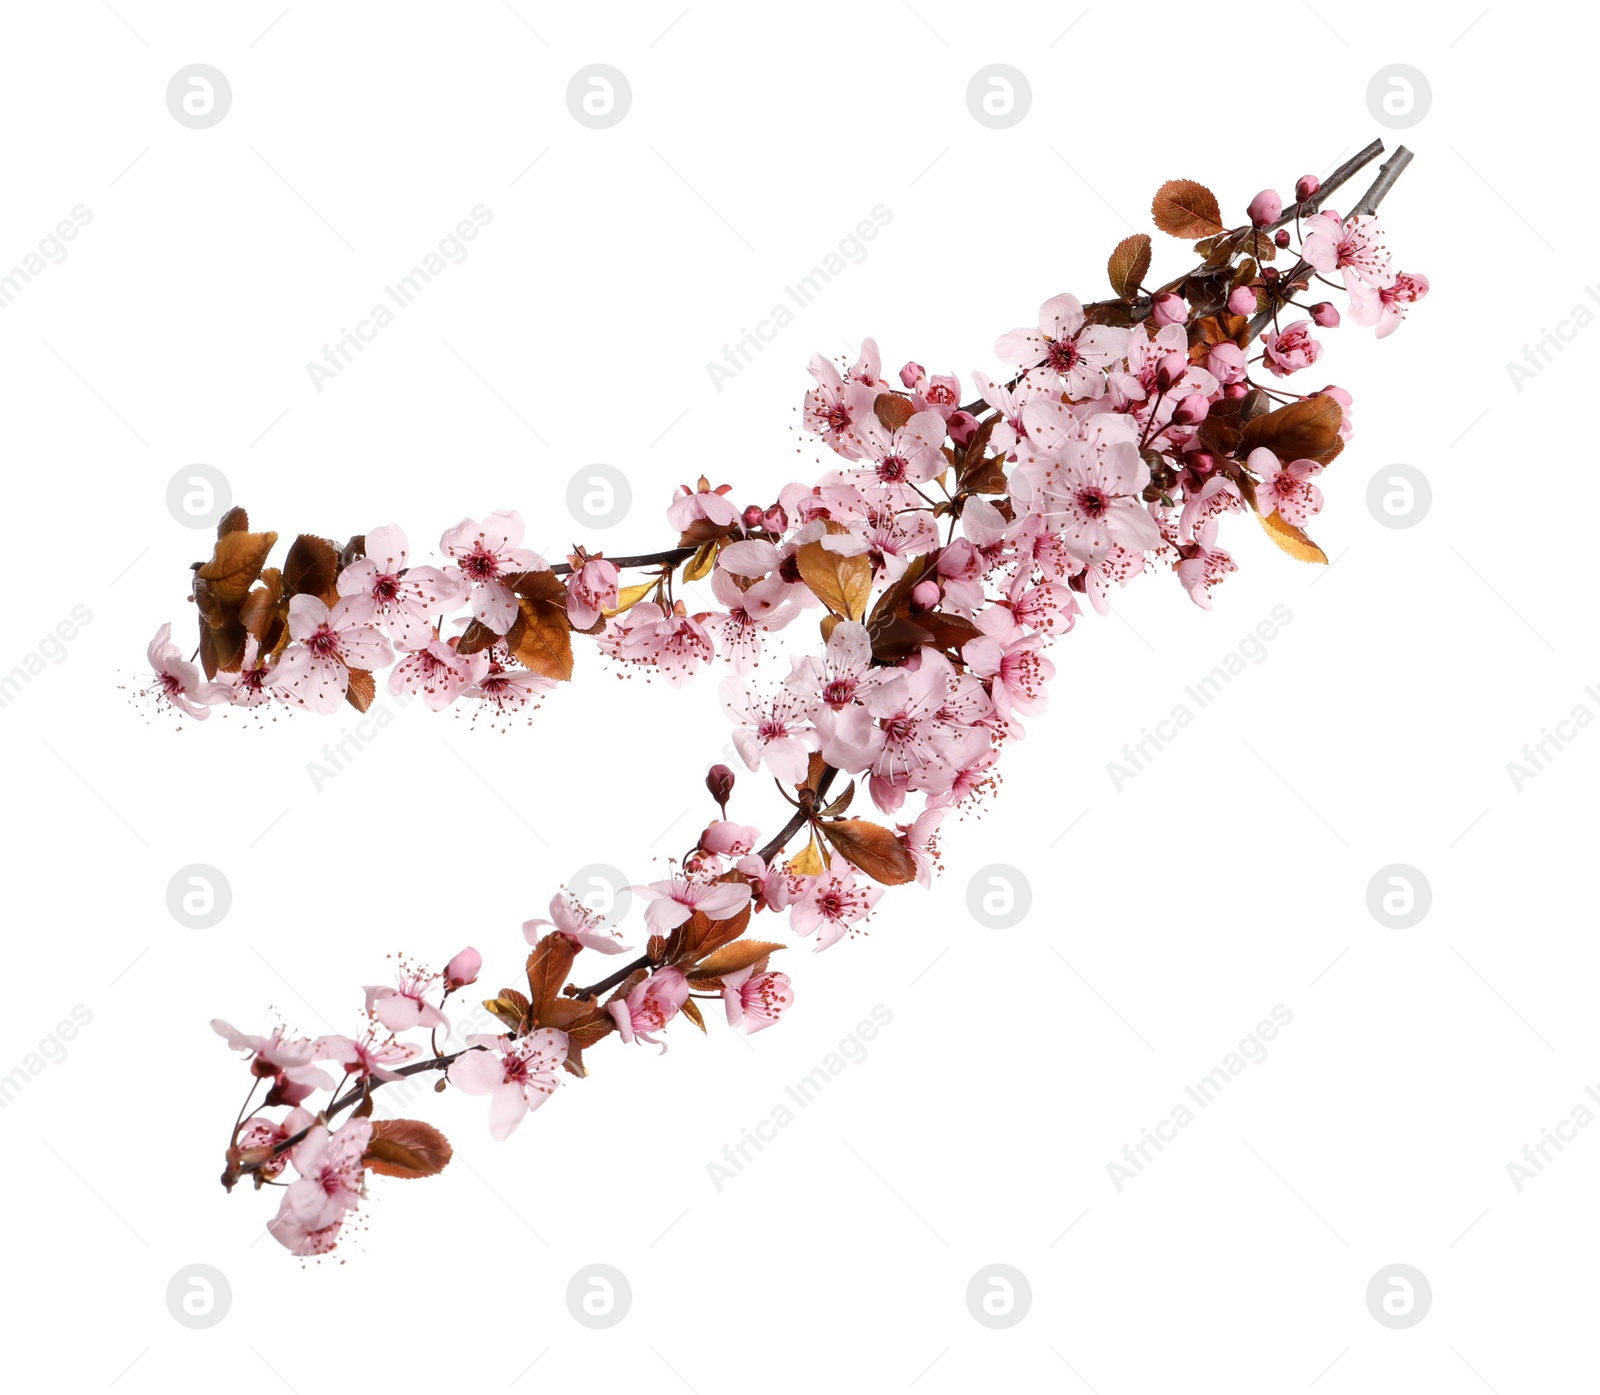 Photo of Cherry tree branches with beautiful pink blossoms isolated on white